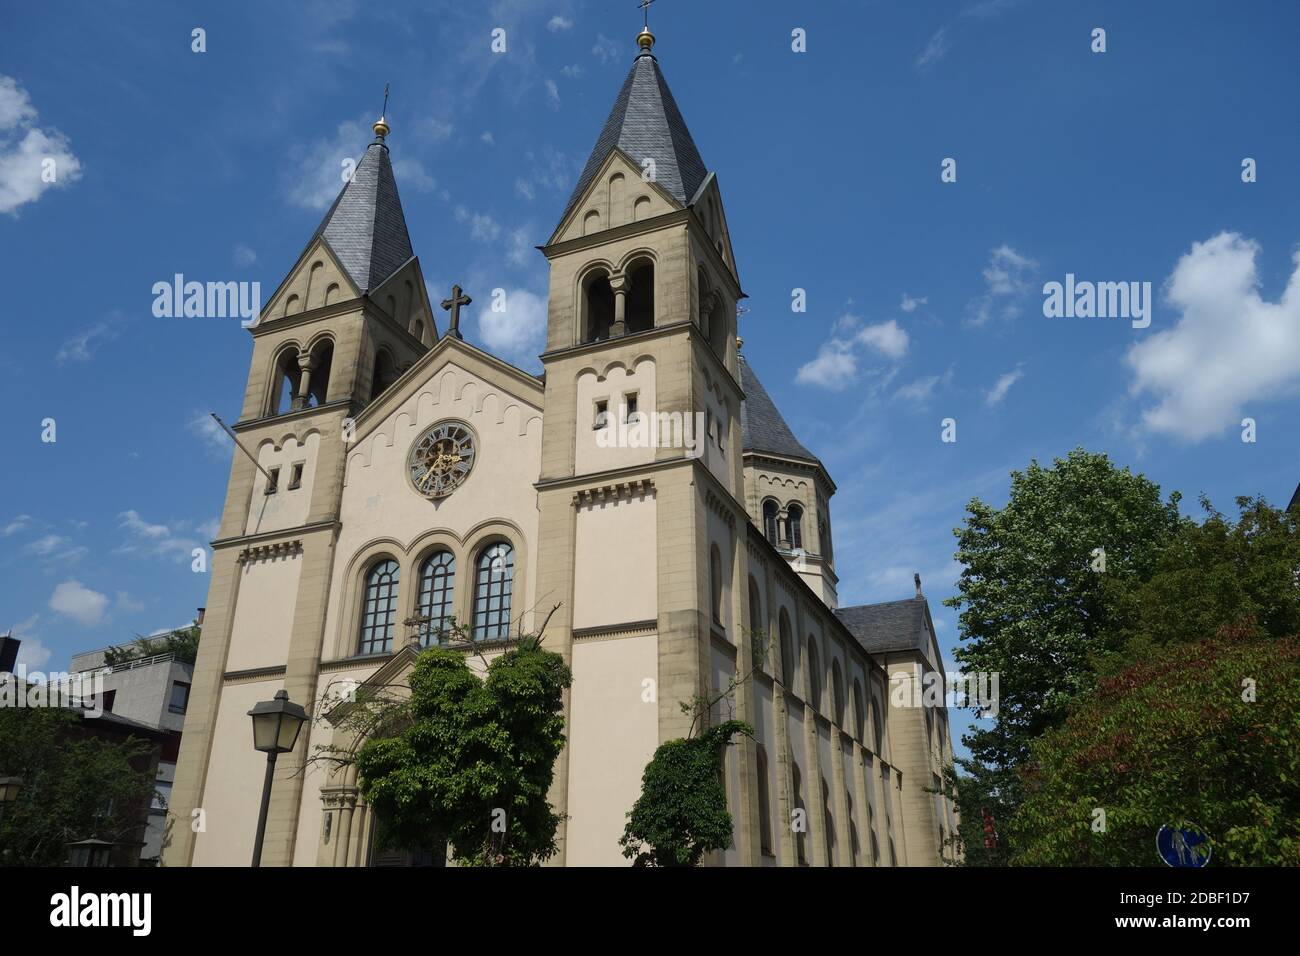 Evangelical Lutheran Church of the Redeemer in Bad Kissingen Stock Photo